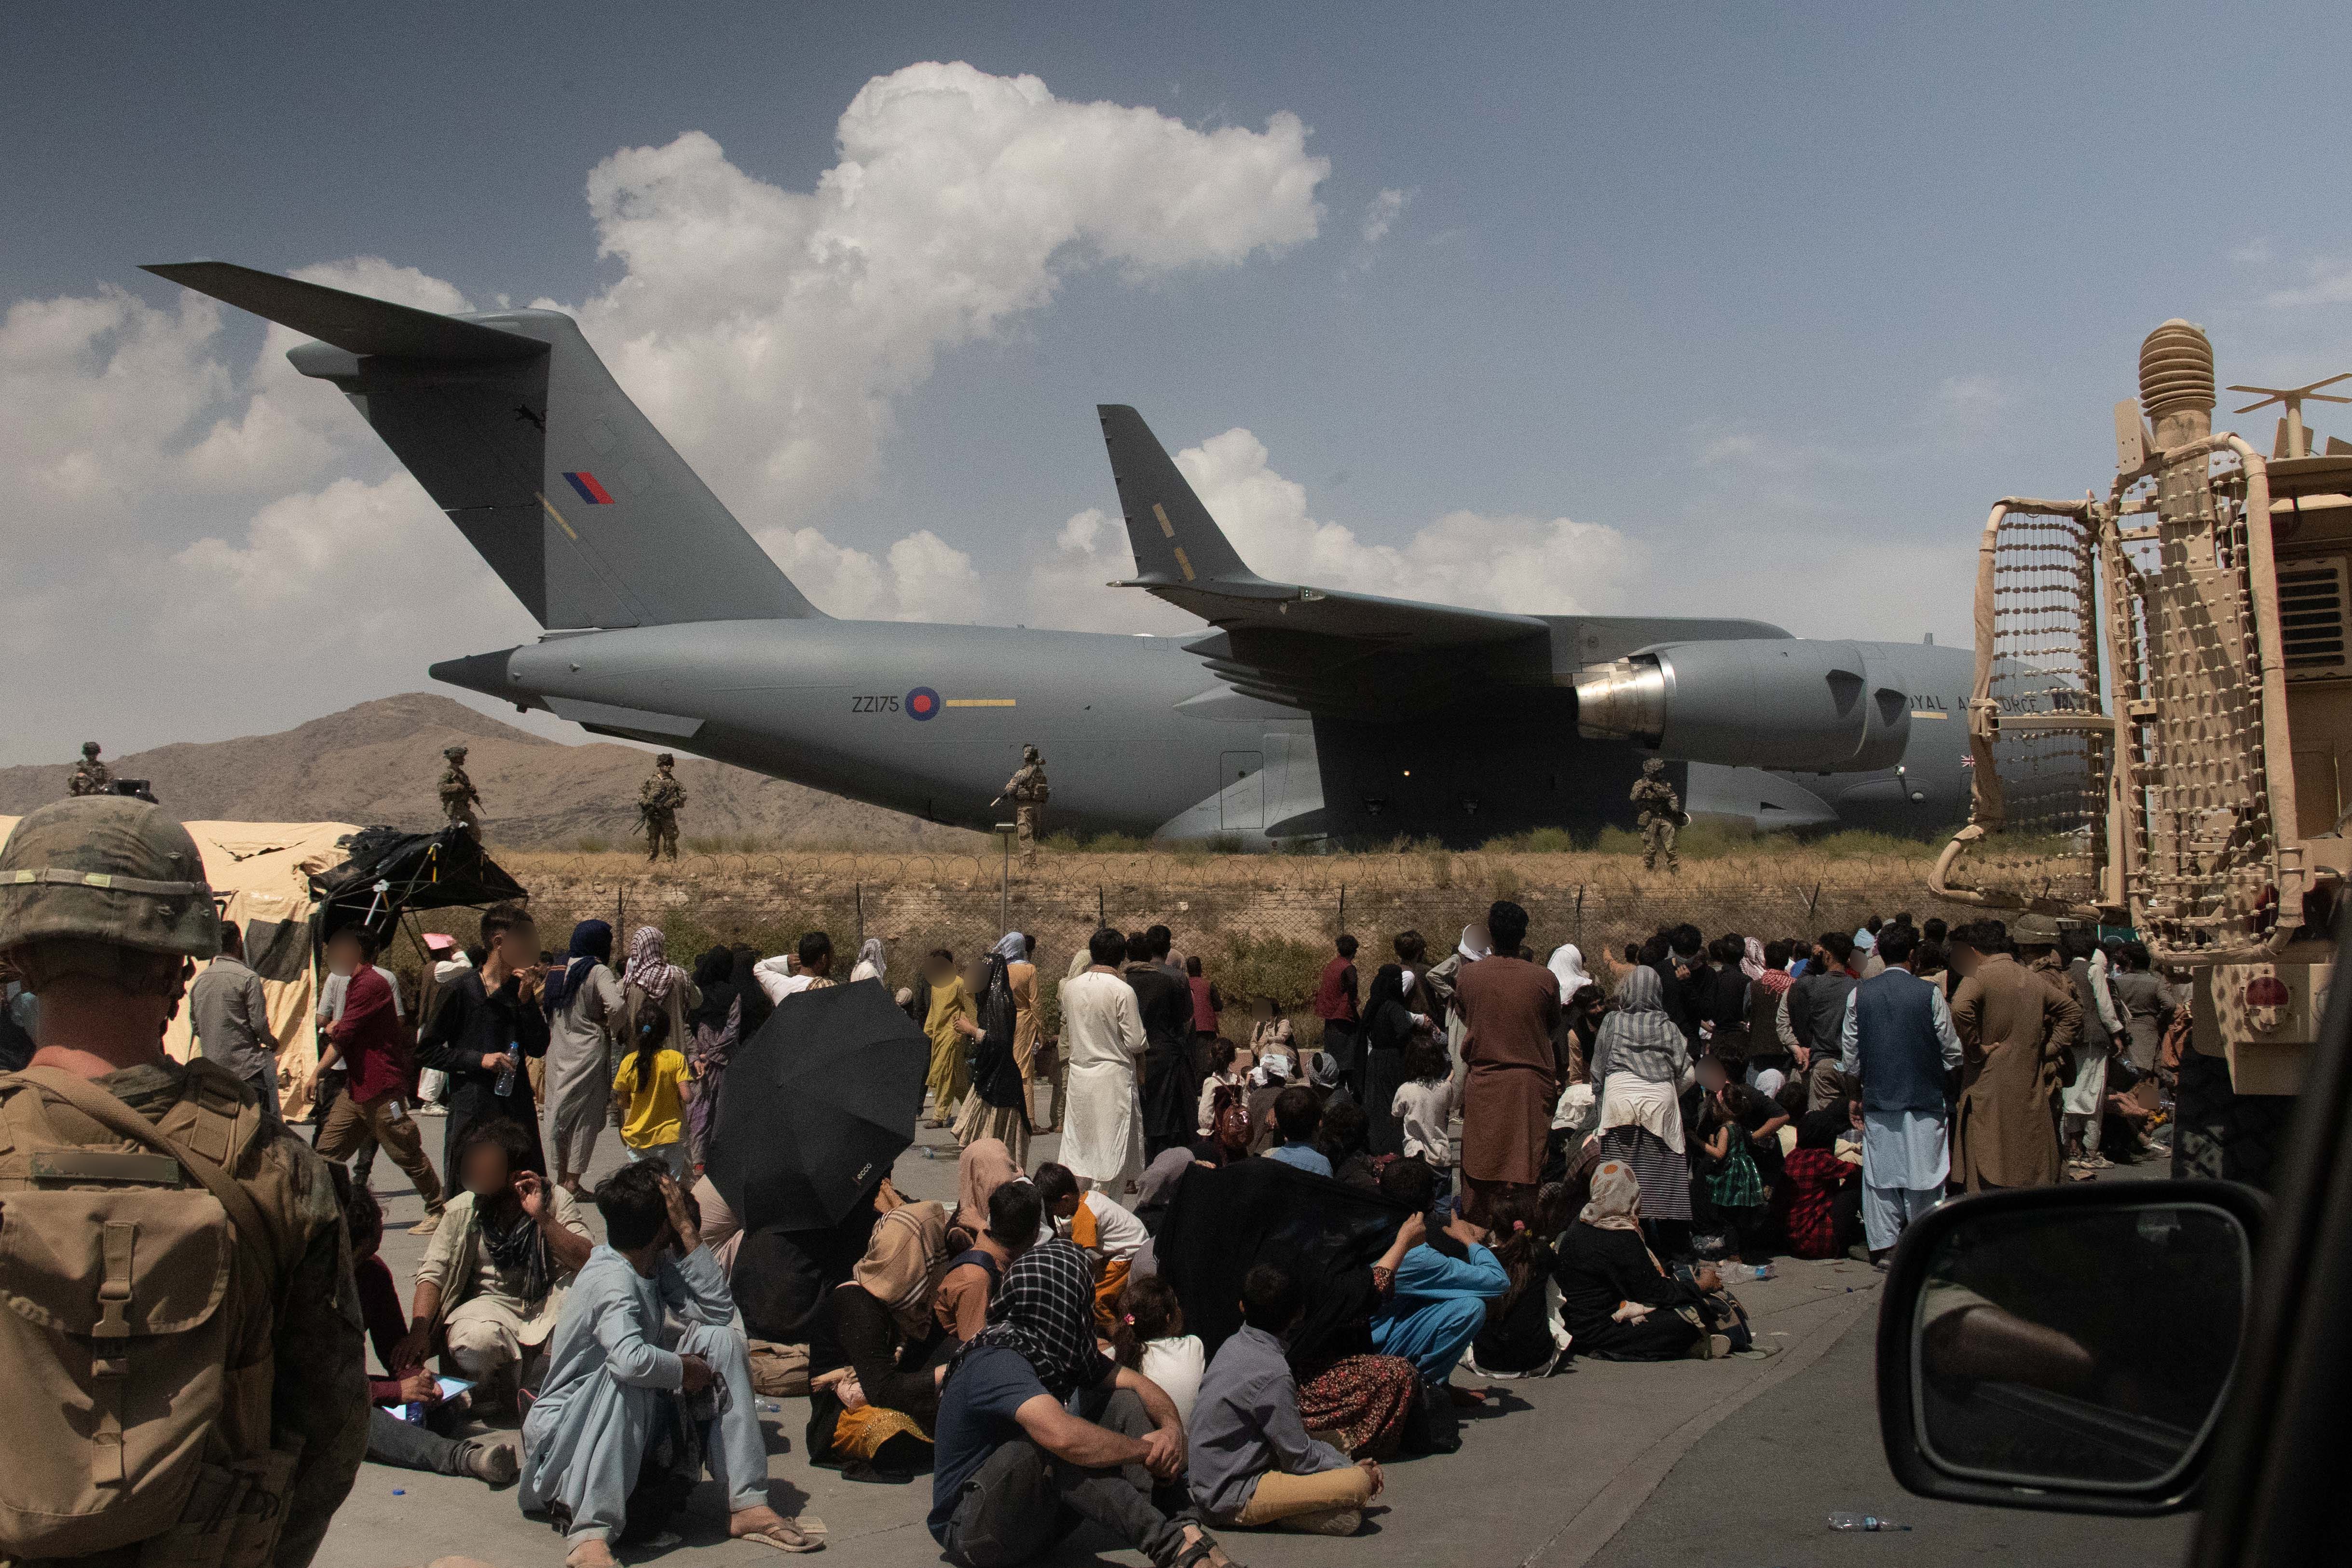 UK Armed Forces supported the evacuation of people from Kabul airport in Afghanistan in January 2022